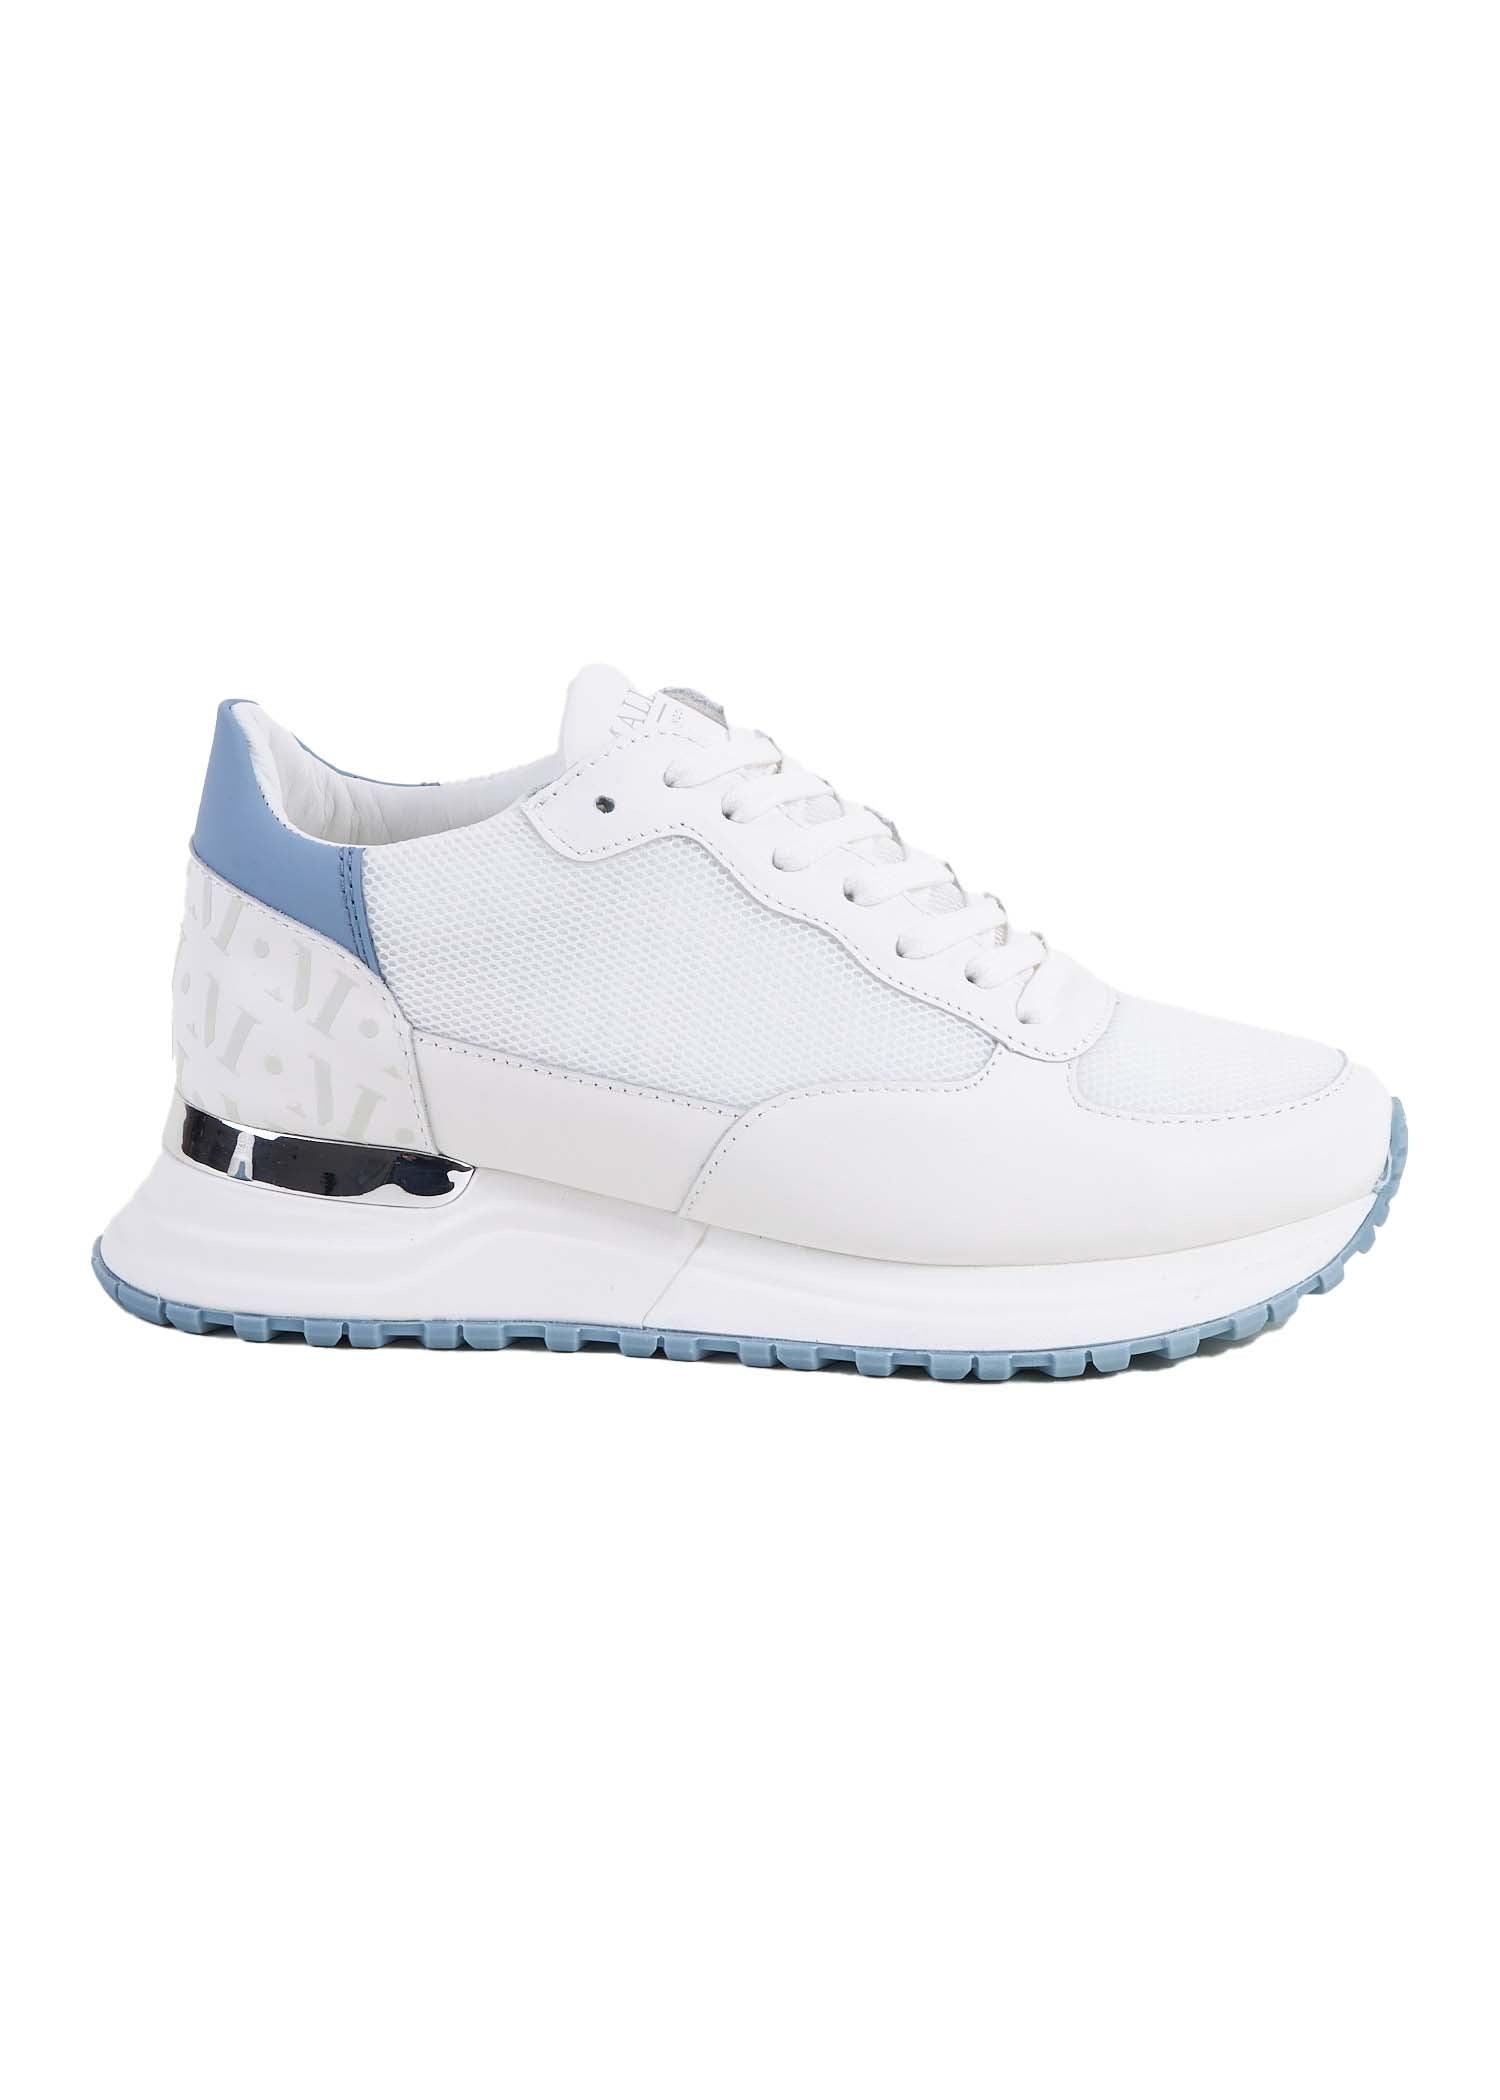 Mallet Leather Popham Tab Trainers in Blue | Lyst